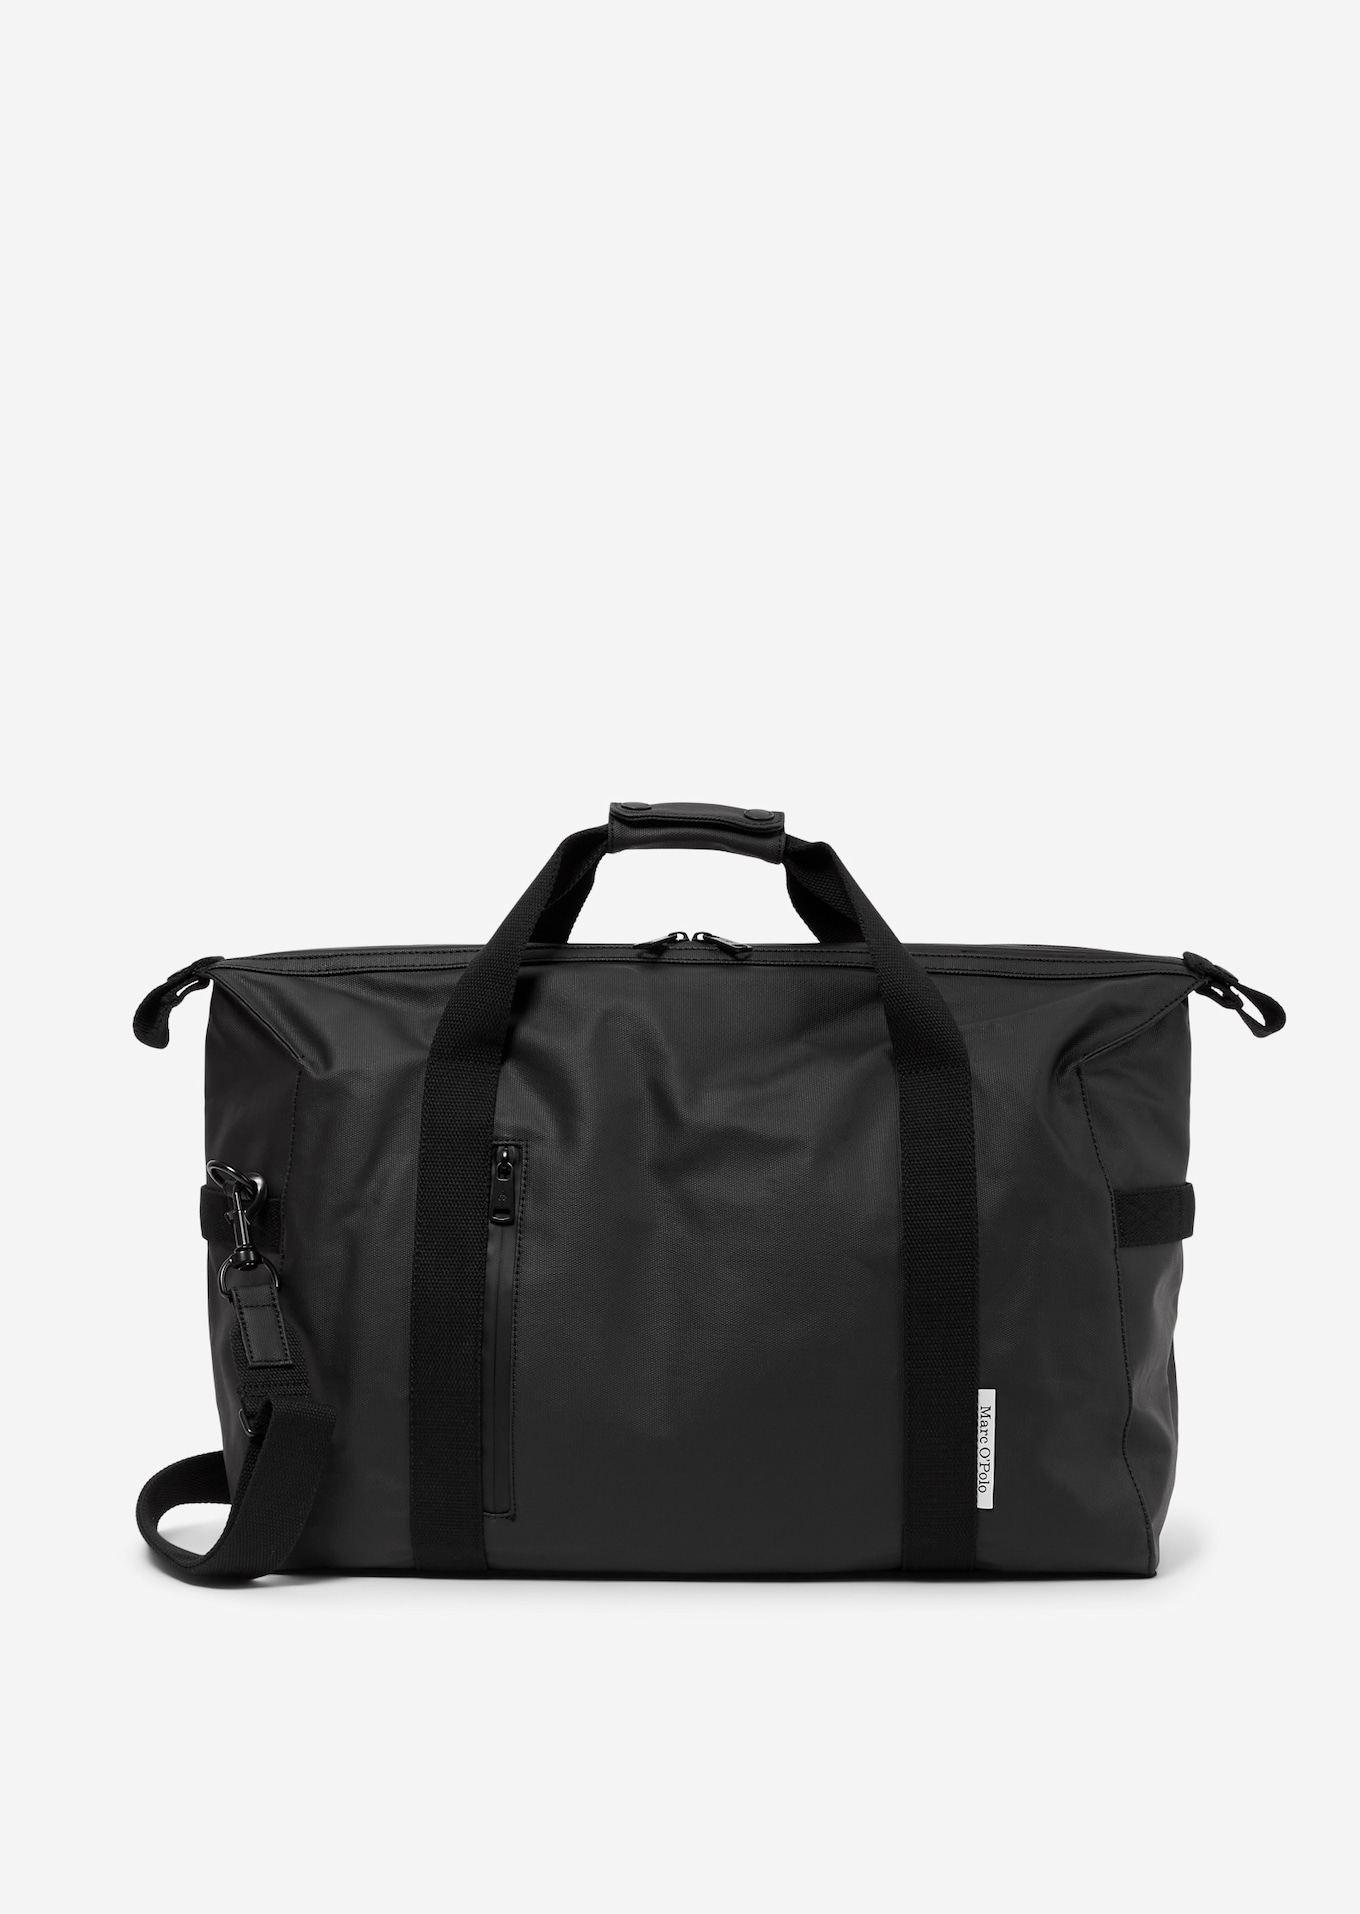 Weekender With water-resistant coating - black | Women | MARC O’POLO